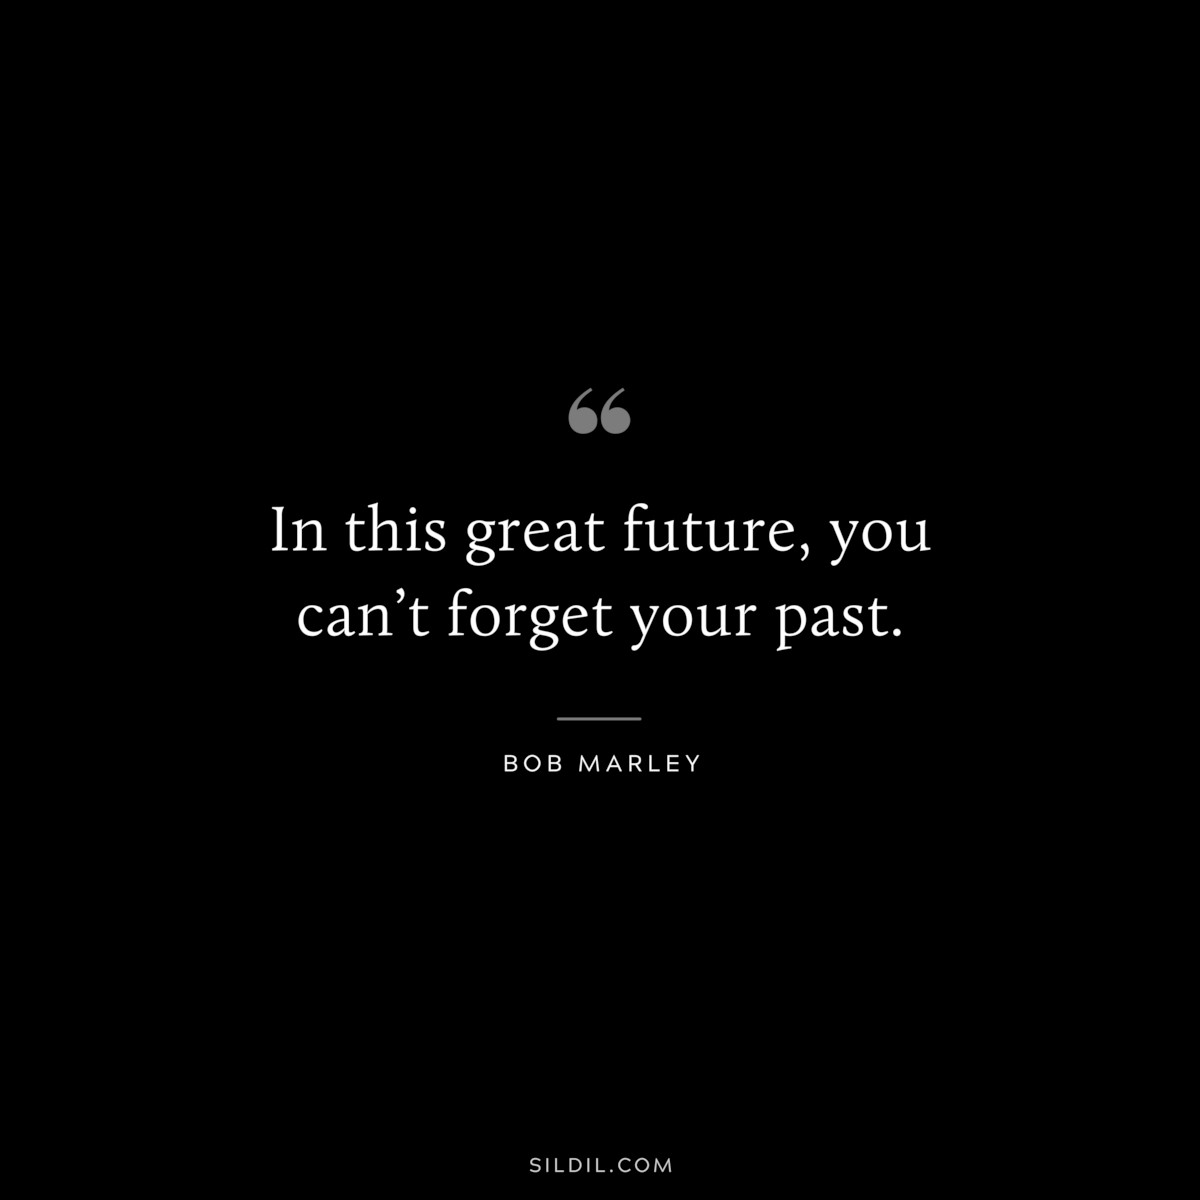 In this great future, you can’t forget your past. ― Bob Marley